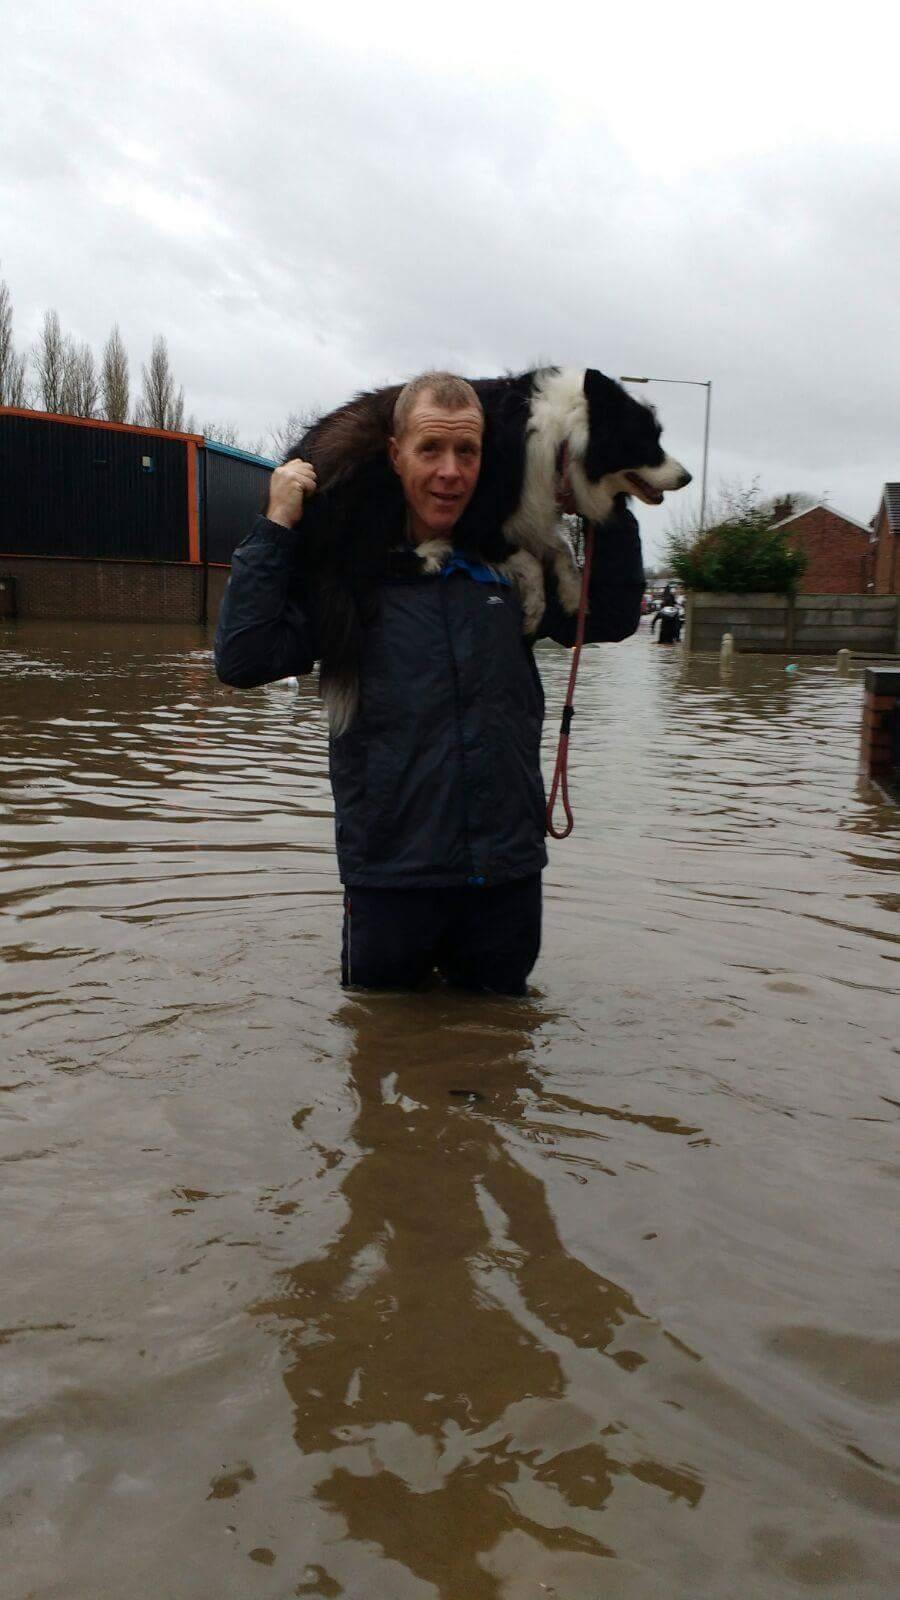 Michael O'Shaughnessy of Whewell Avenue, Dumers Lane fleeing from their home whilst saving Chica the family dog.
Picture credit: Janette O'Shaughnessy 
Sent in by Charlotte Moran from Bury